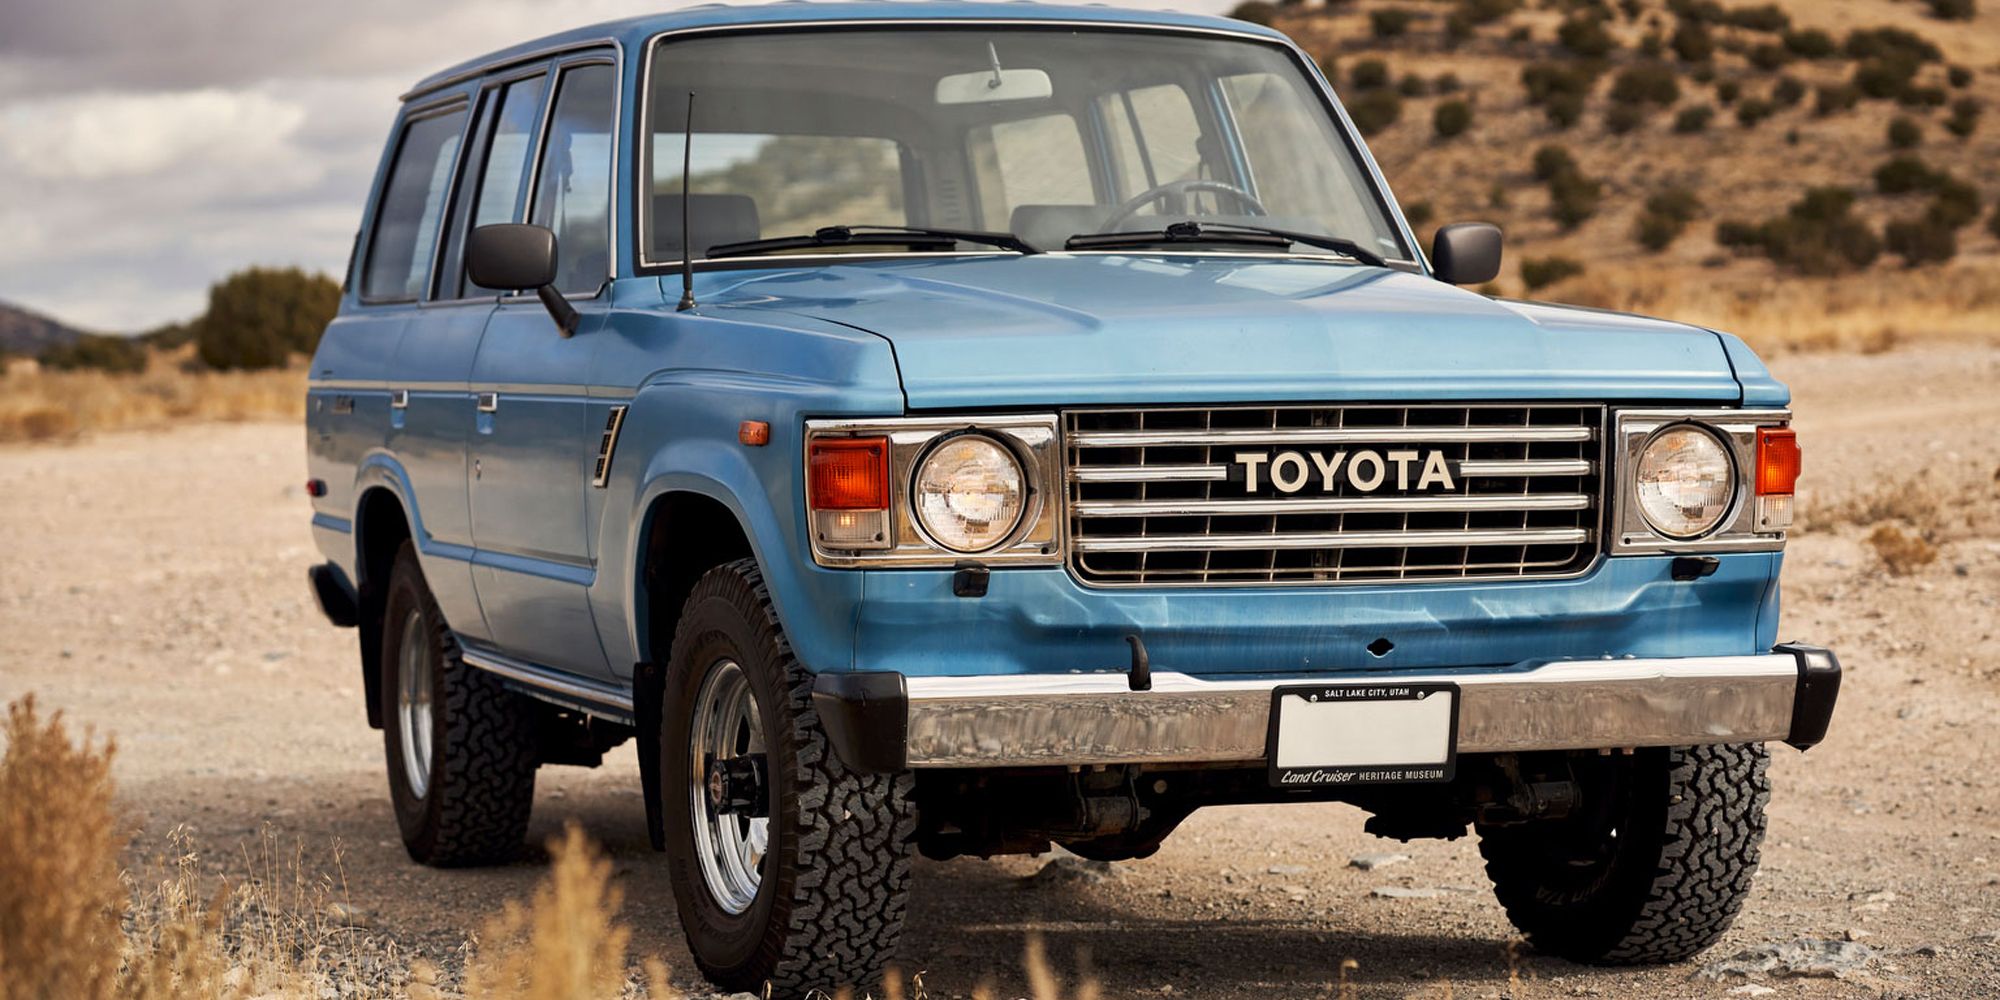 The front of the FJ62 Land Cruiser